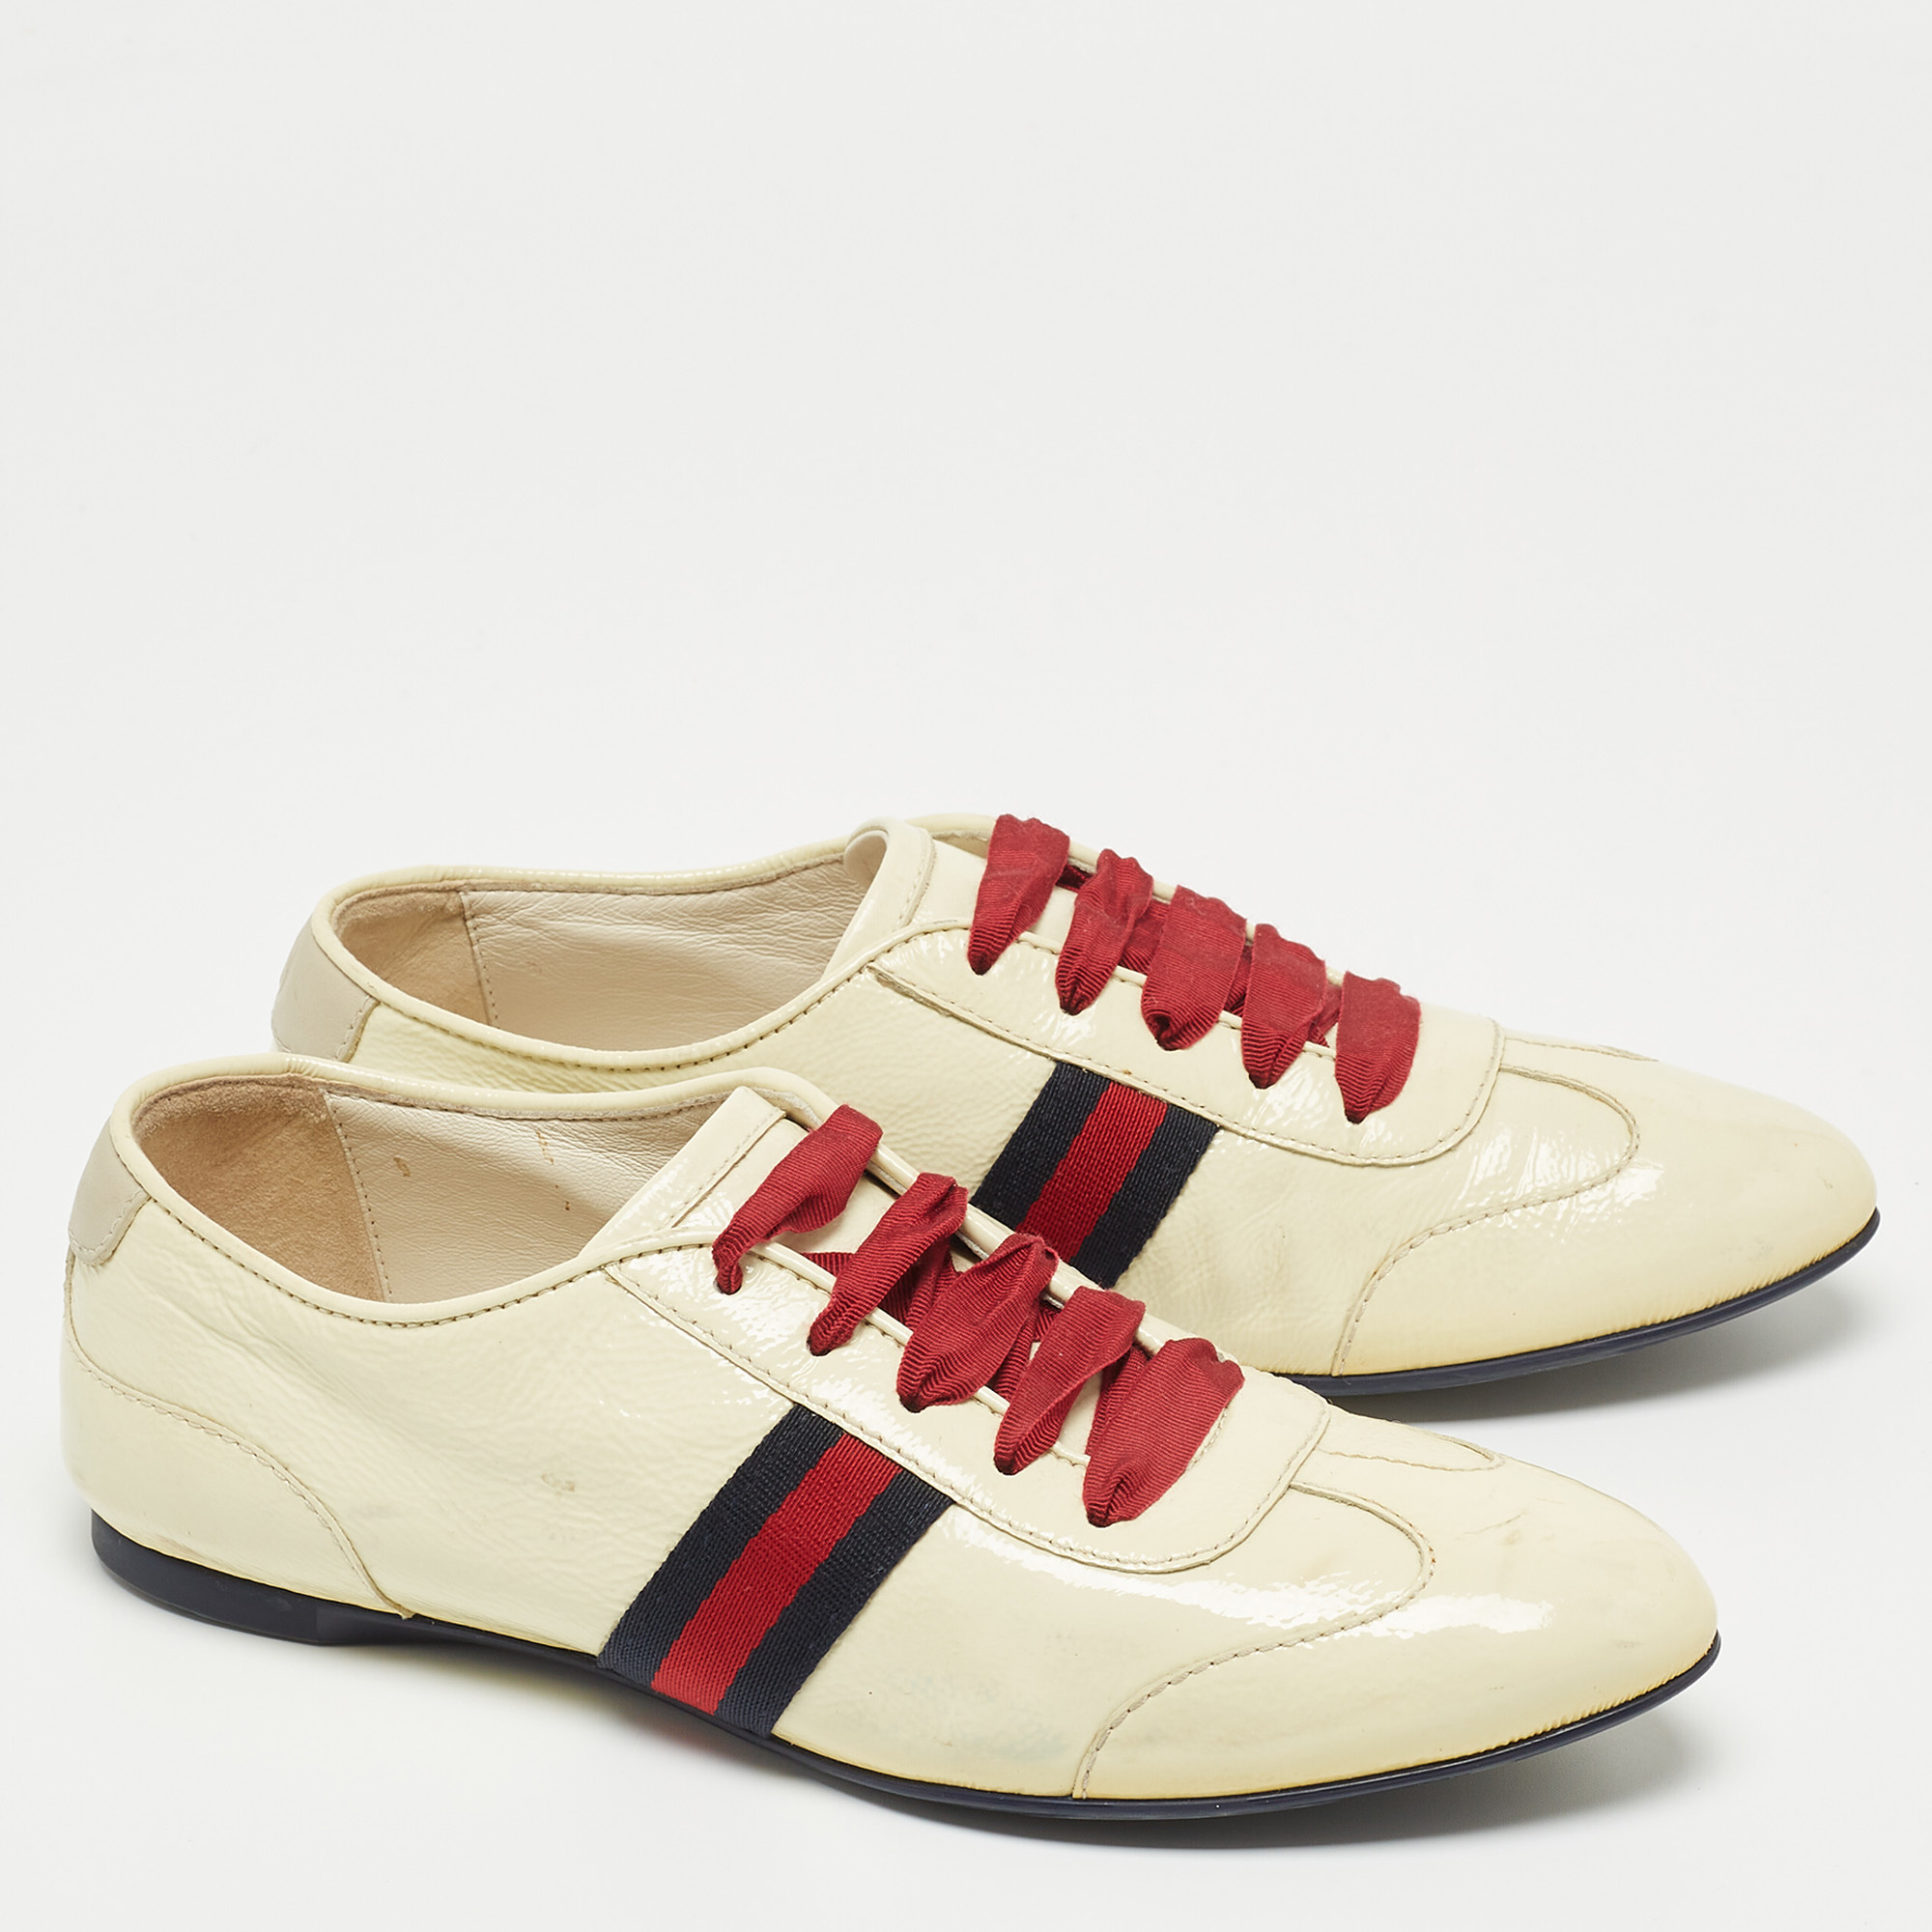 Gucci Cream Patent Leather Web Lace Up Sneakers Size 35